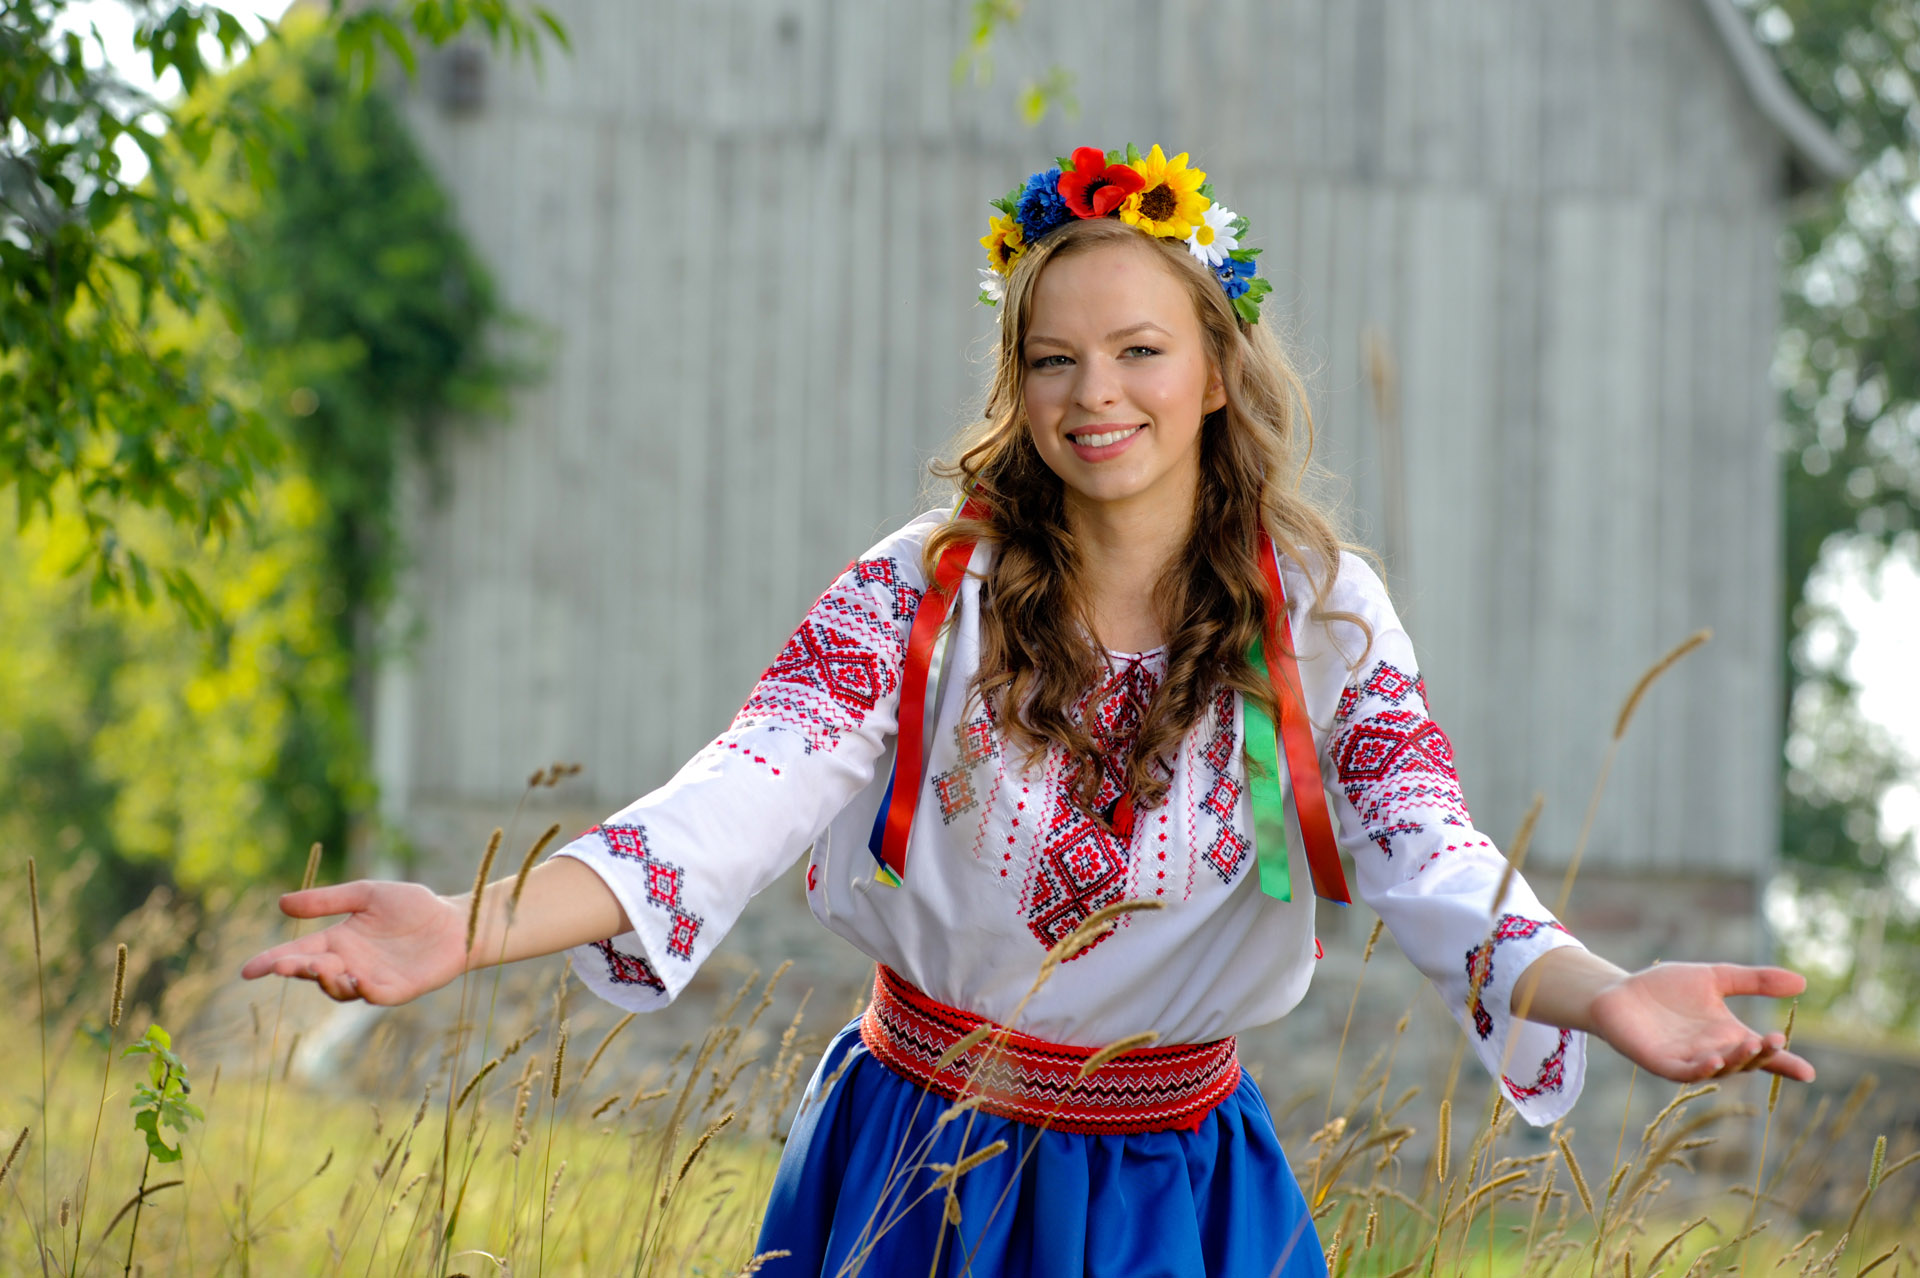 Troy , Michigan senior pictures photo taken of the high school senior doing a traditional Russian dance for her senior pictures in Troy, Michigan.